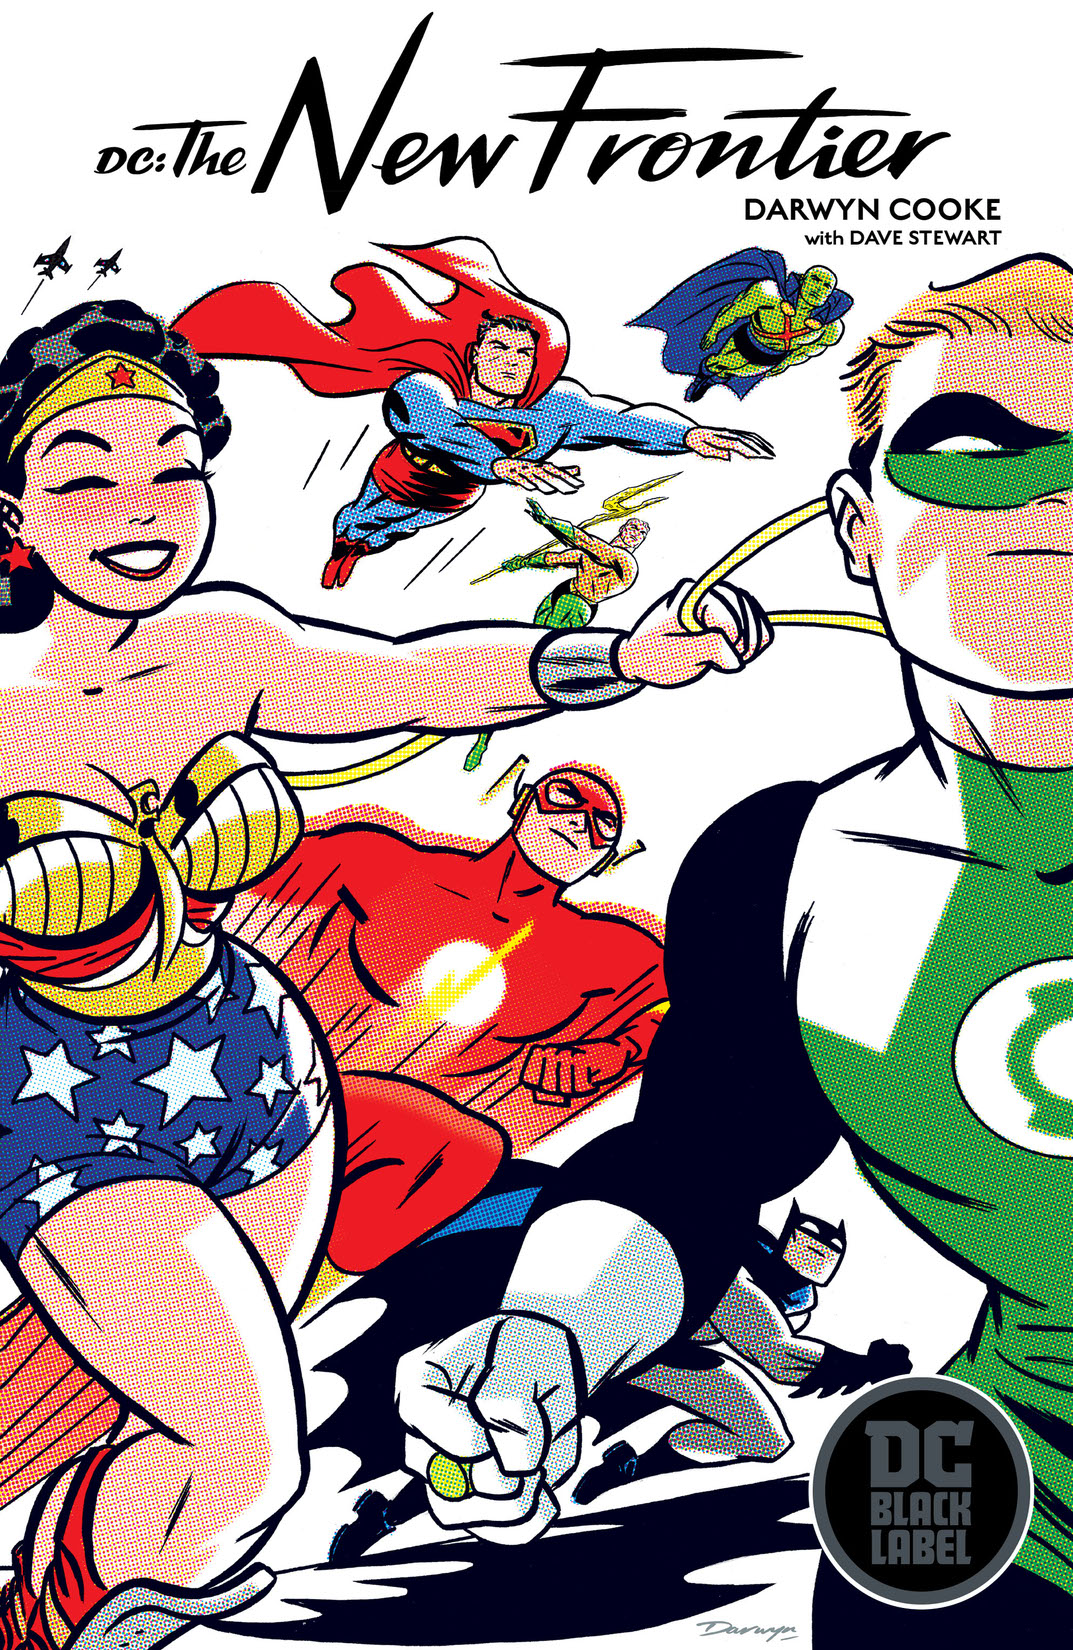 DC: The New Frontier (DC Black Label Edition) preview images